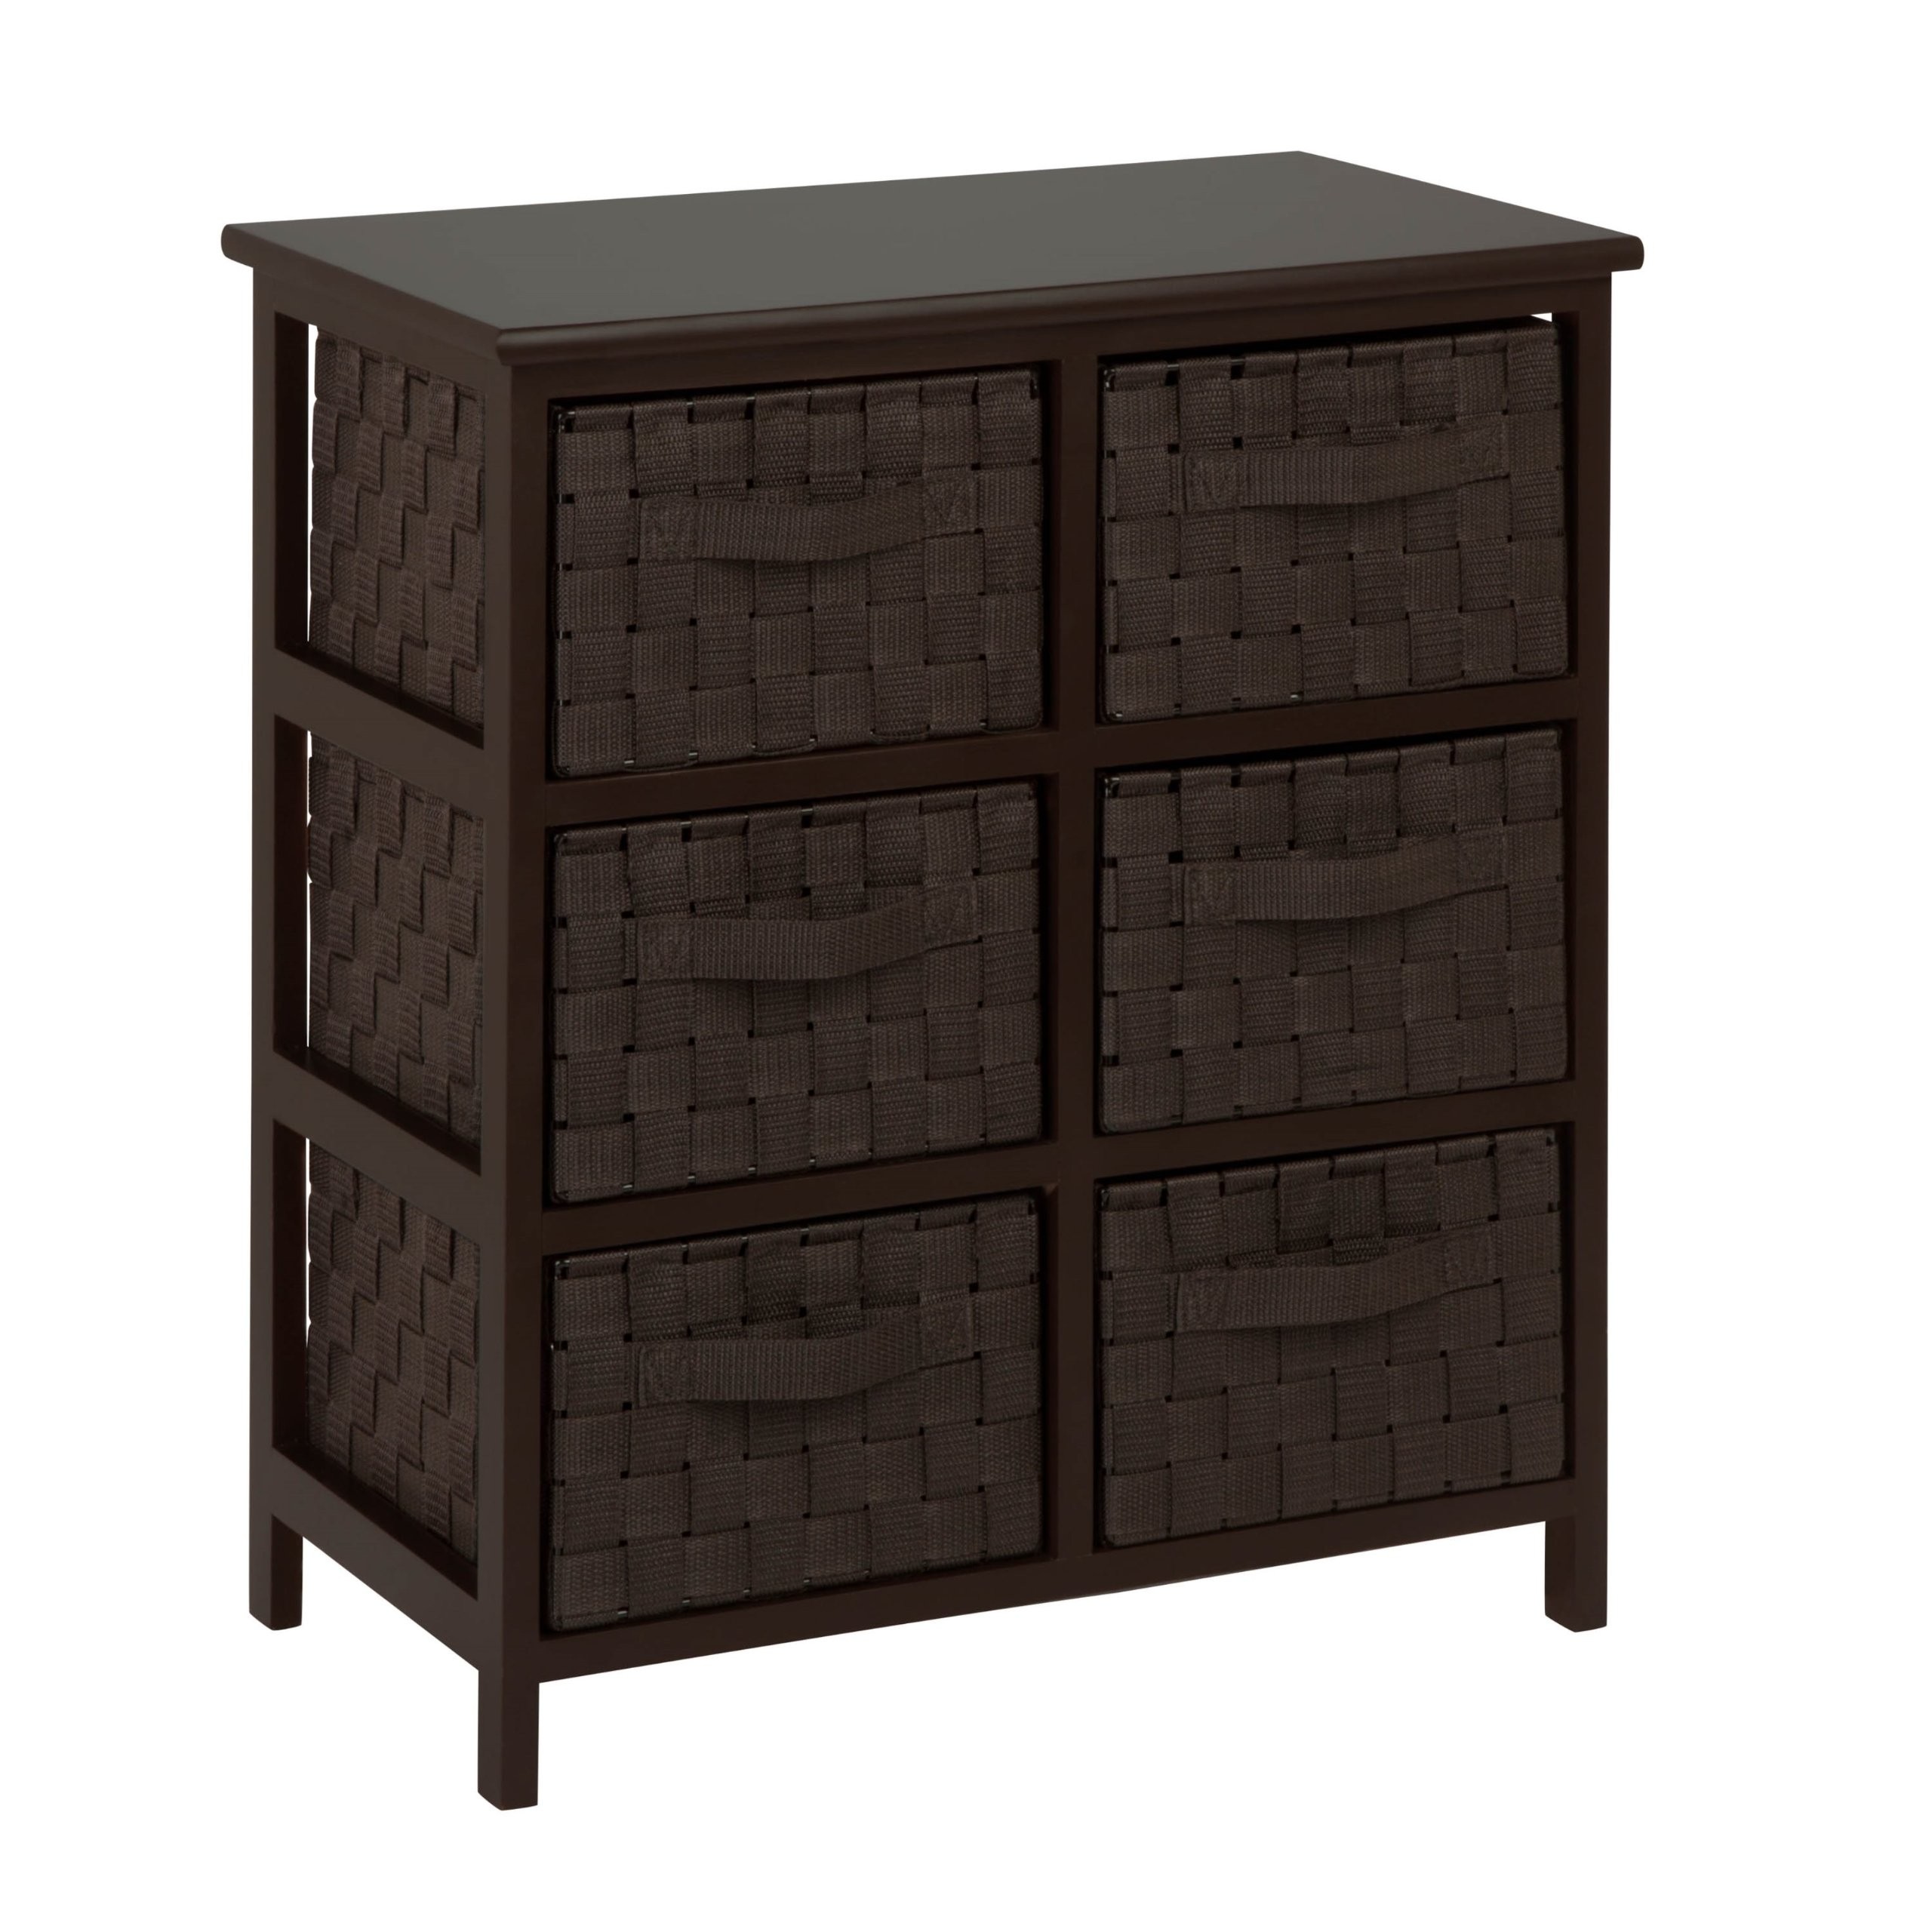 Honey-Can-Do TBL-03759 6-Drawer Storage Chest with Woven-Strap Fabric, Espresso, 24-Inch